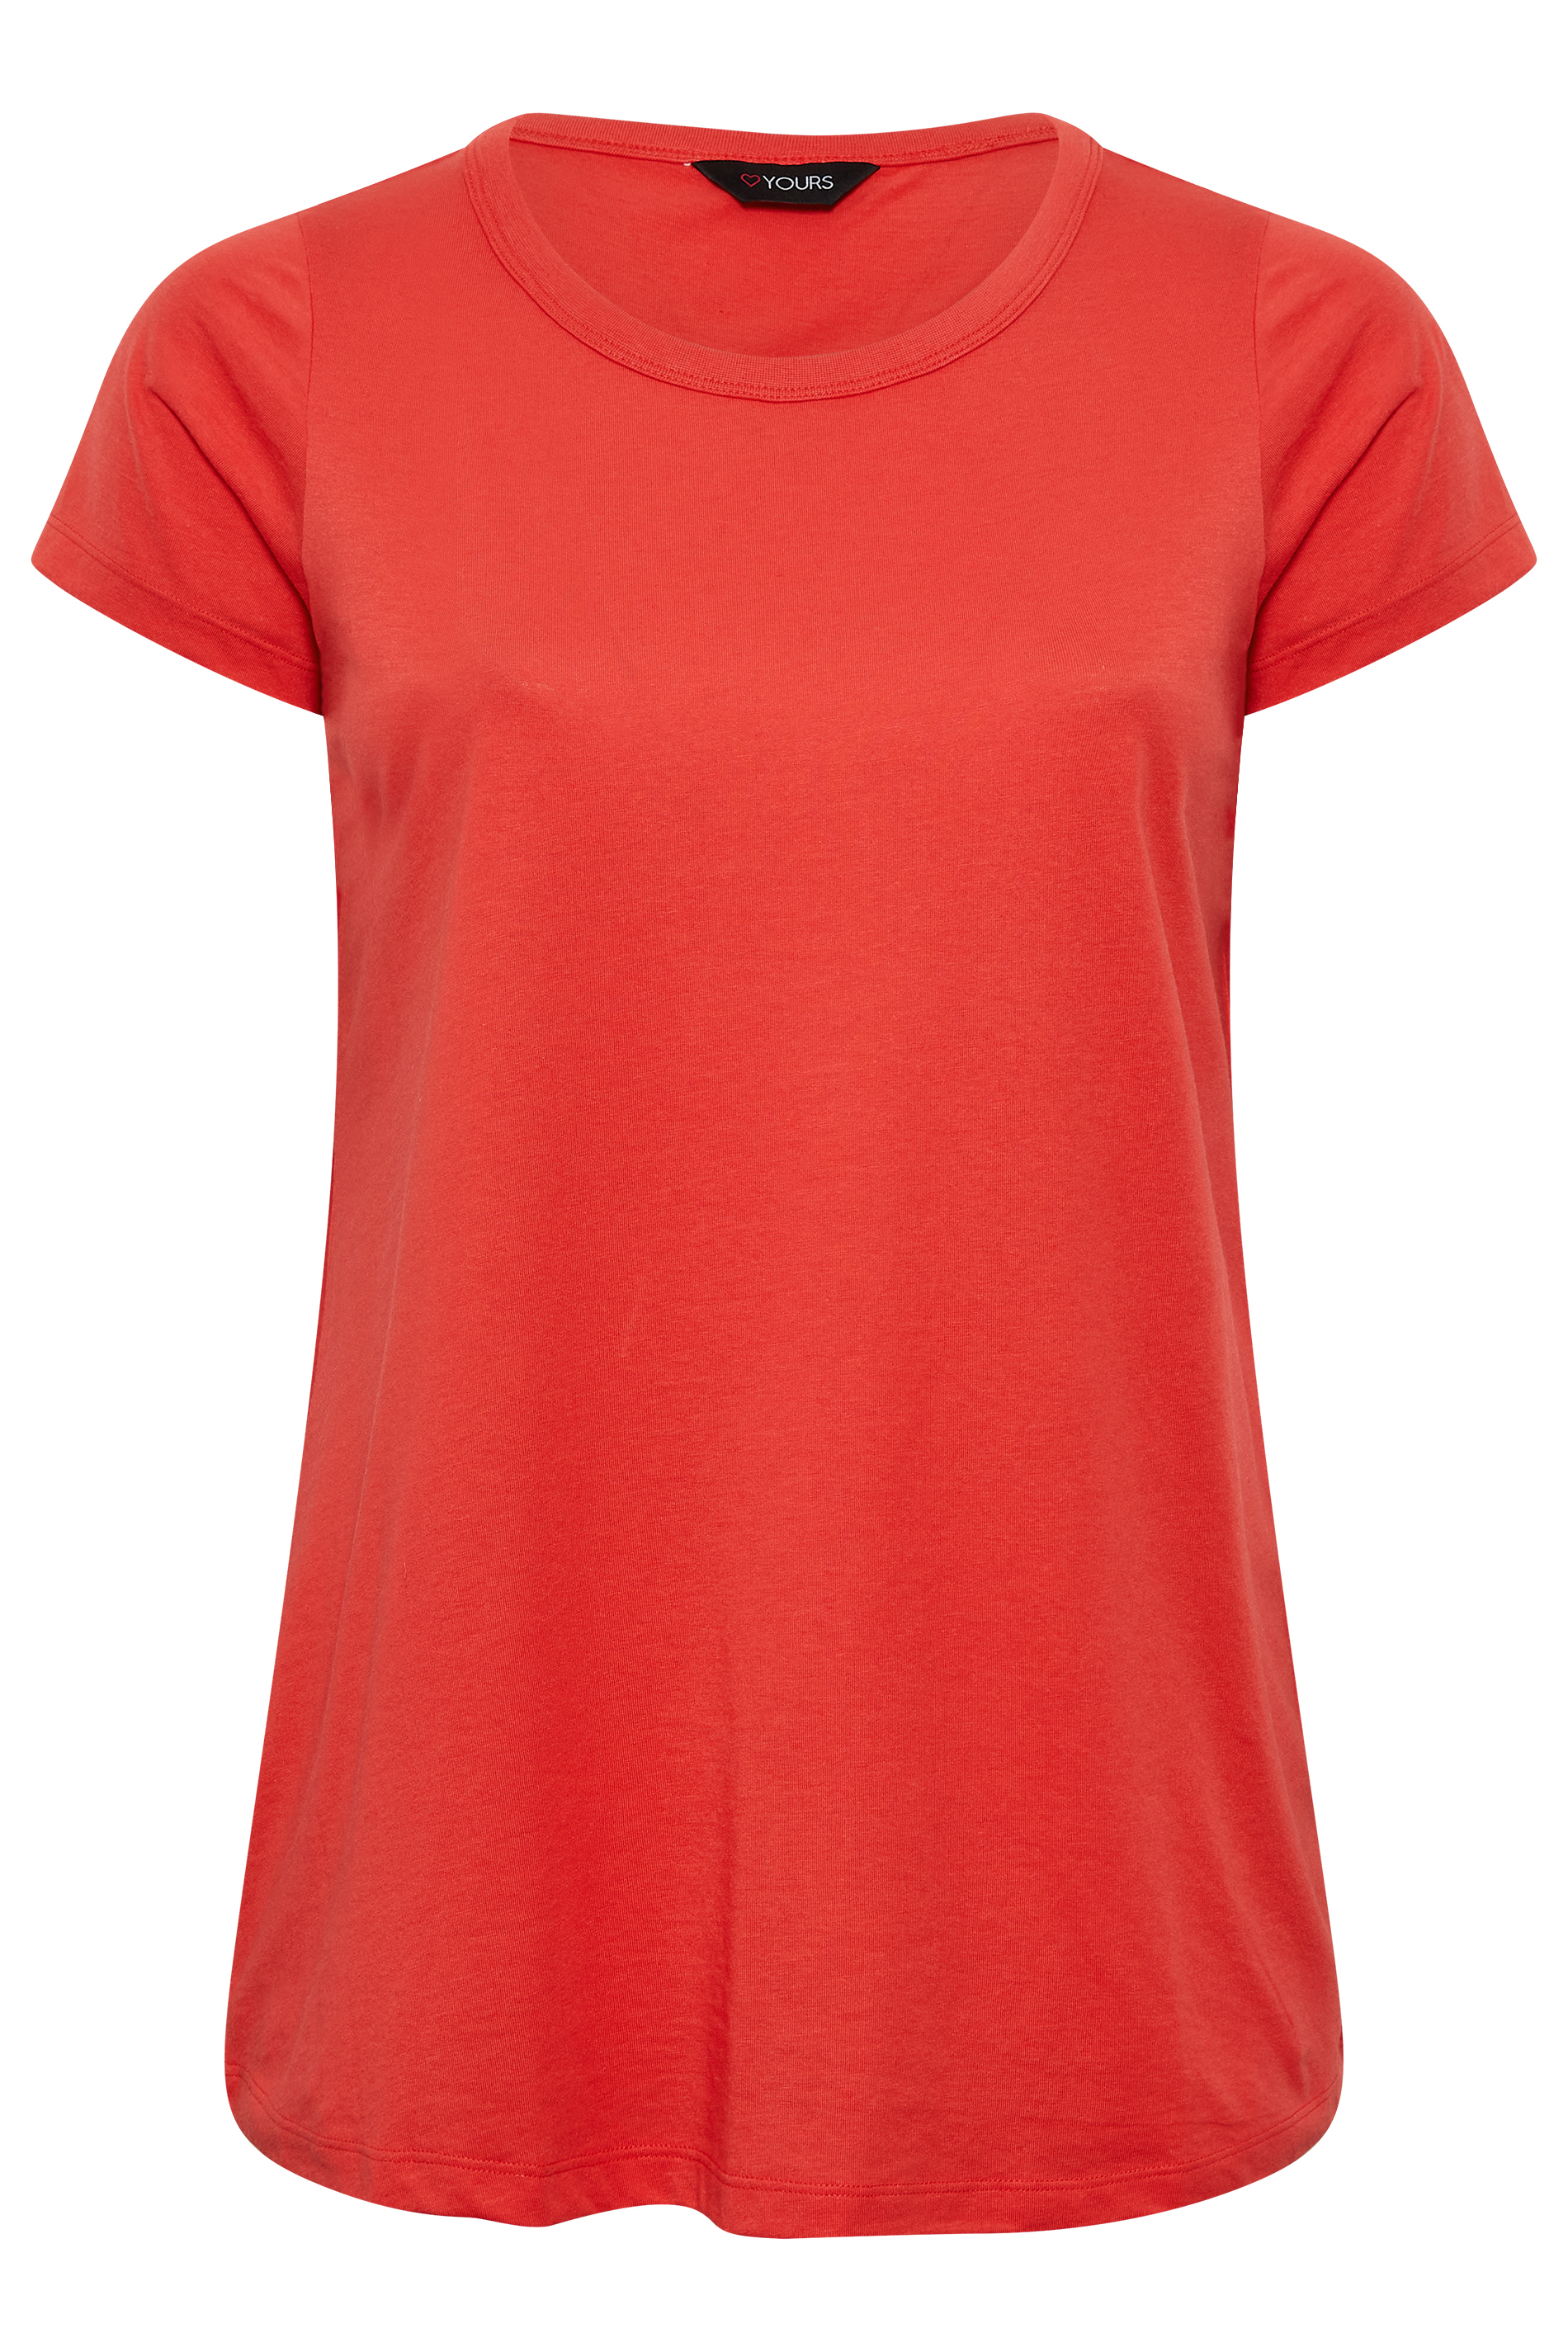 Yours Plus Size Curve Red Basic Short Sleeve T-Shirt - Petite | Yours Clothing 1